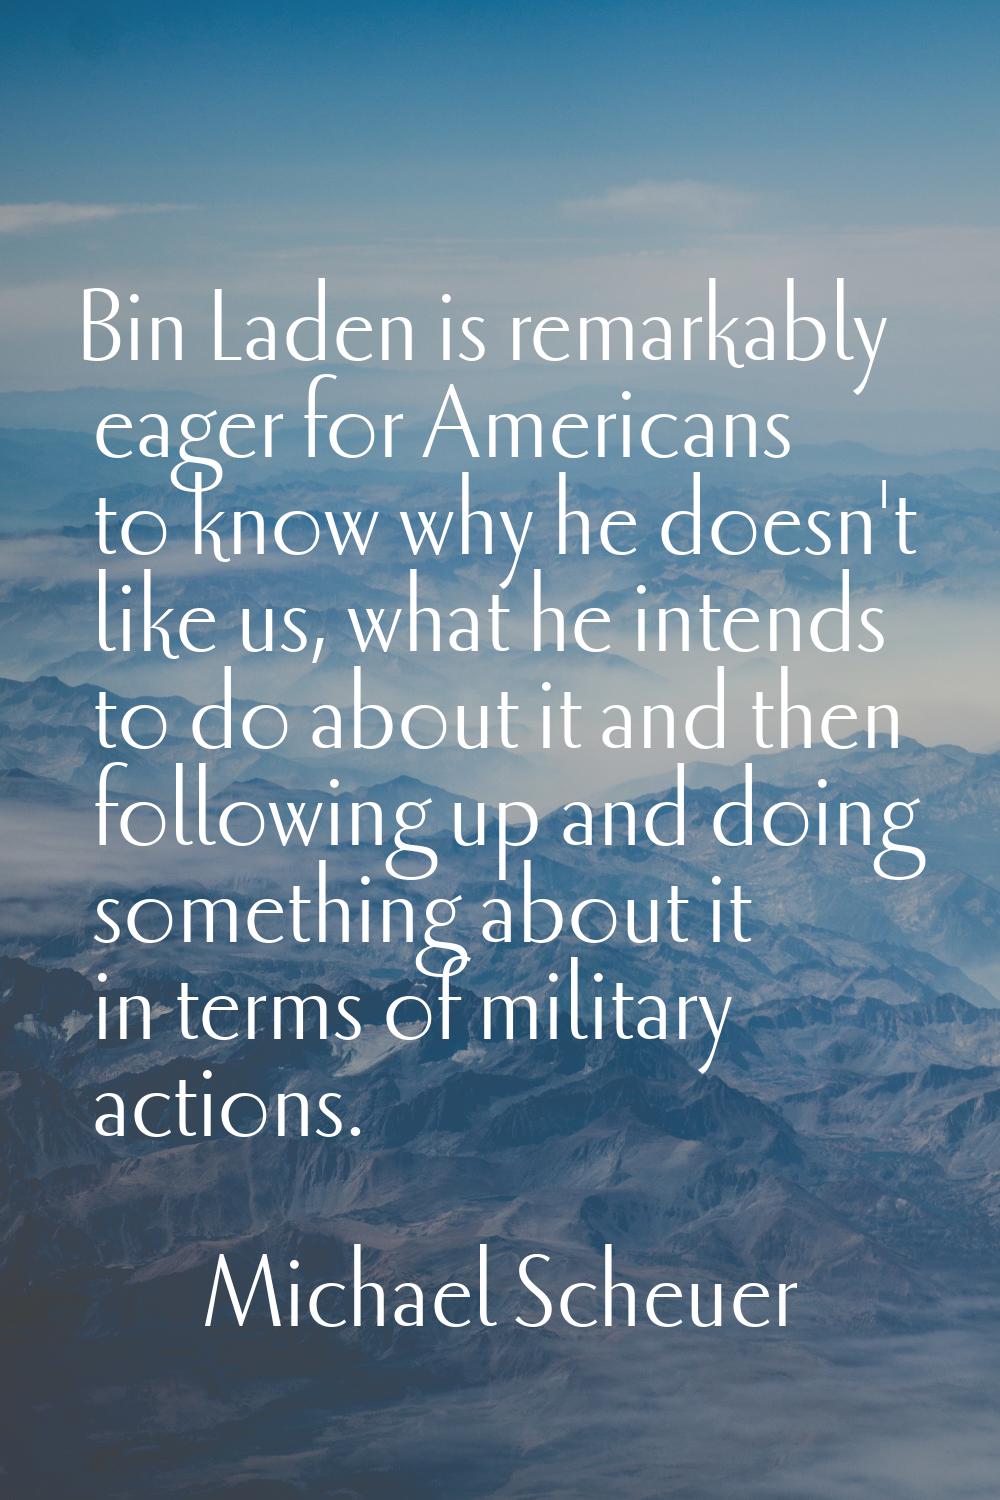 Bin Laden is remarkably eager for Americans to know why he doesn't like us, what he intends to do a